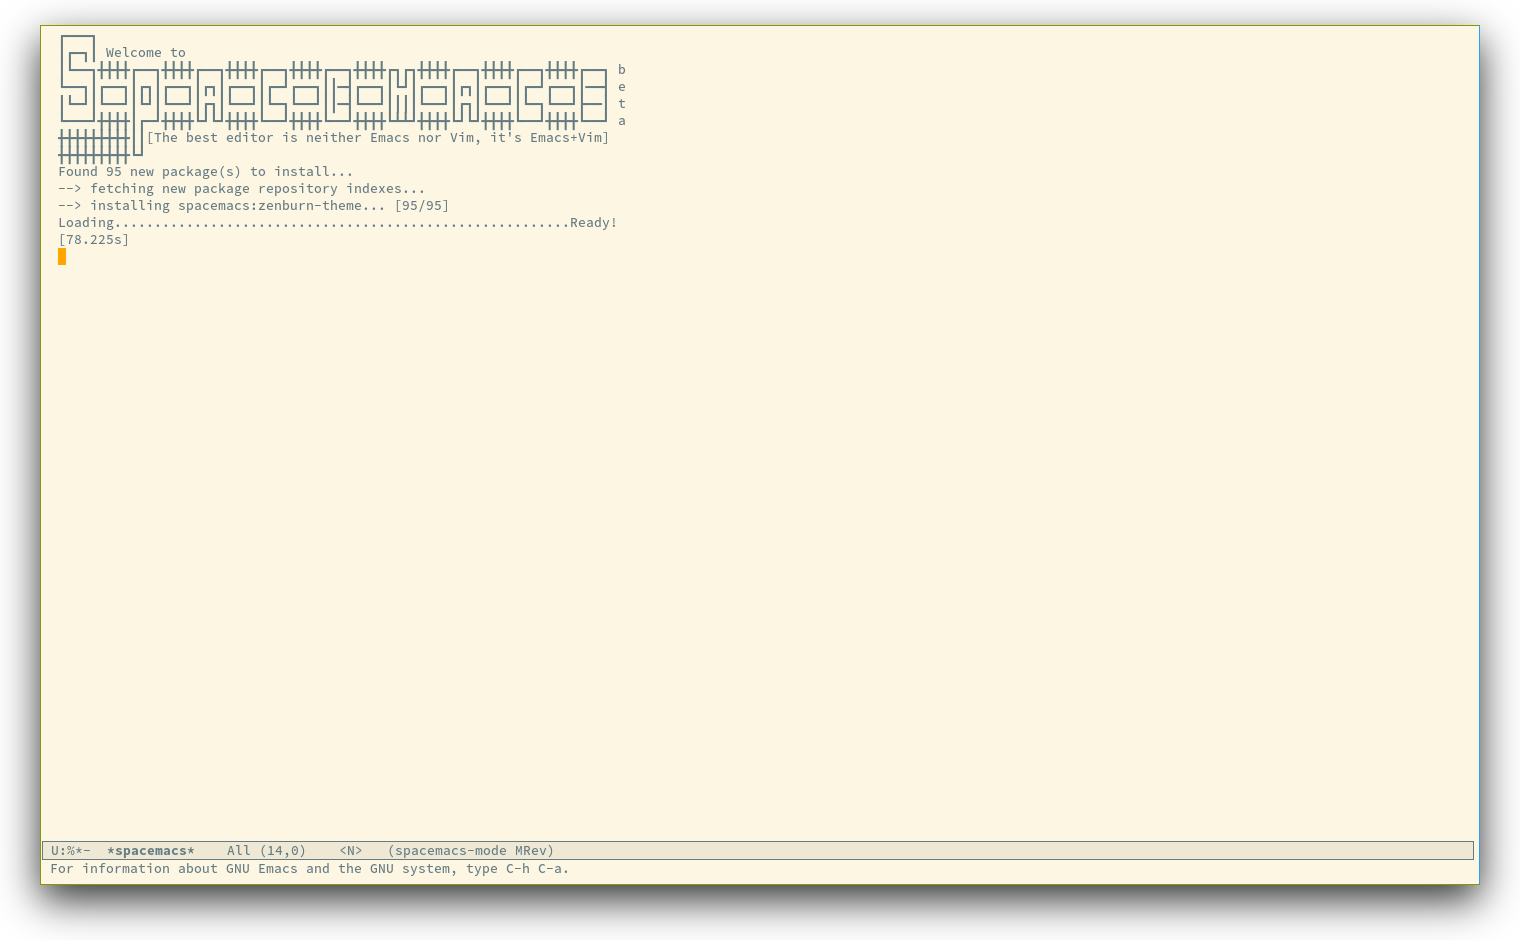 /TakeV/spacemacs/media/commit/7274d9d5c2924fffe1334be14a6daf099c332c81/doc/img/spacemacs-startup.png